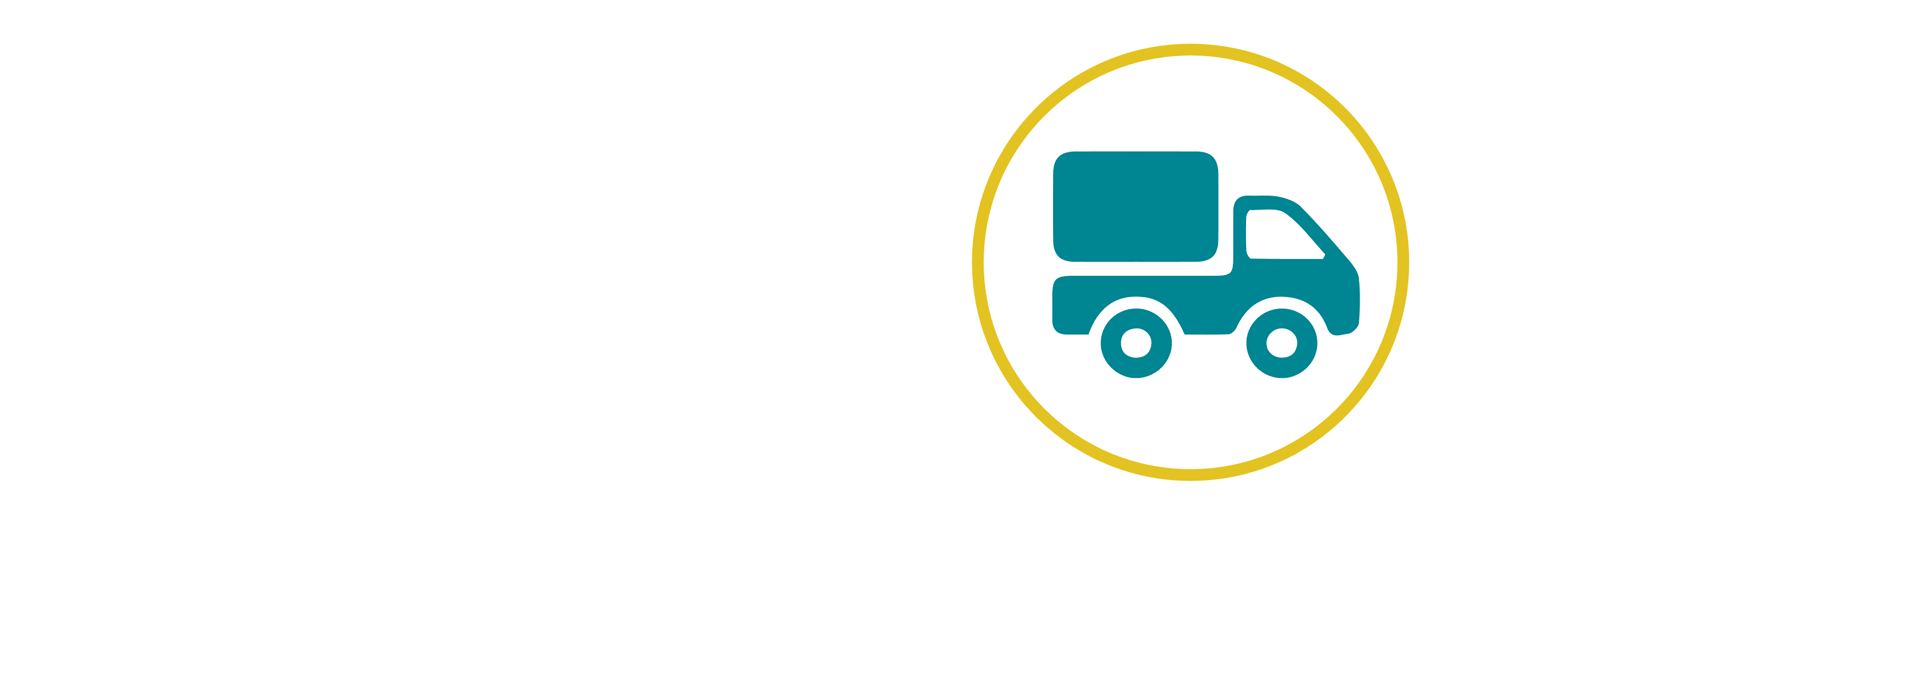 Direct Mail Shipping Vehicle 